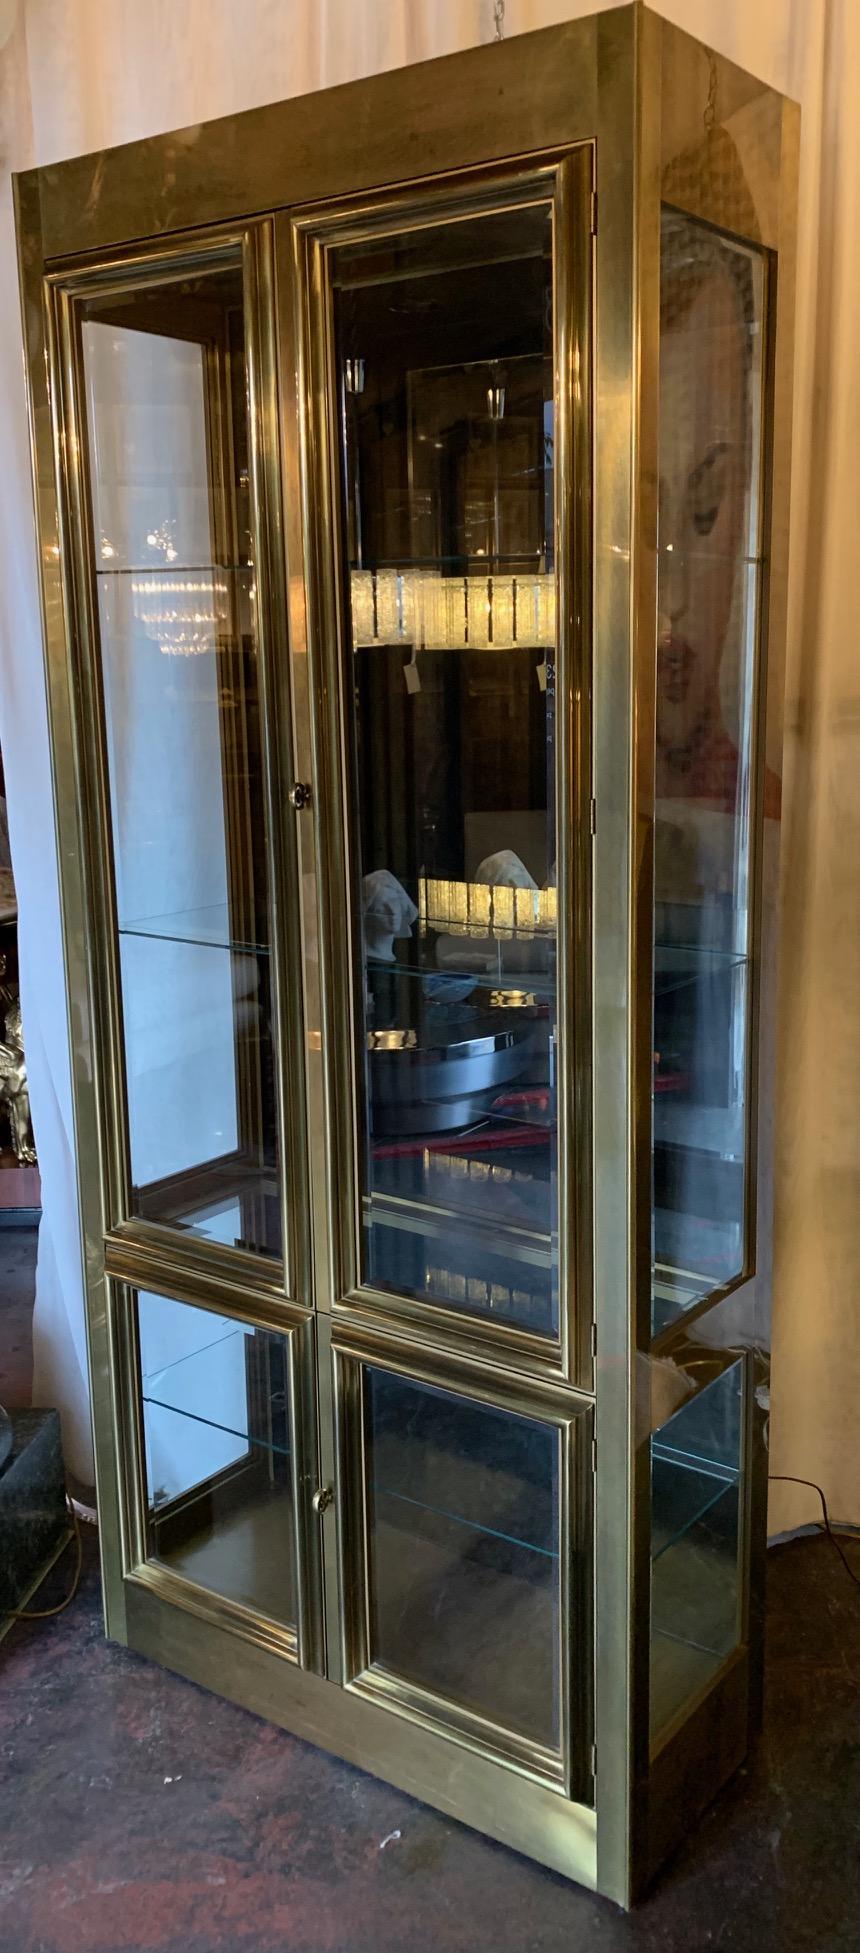 Mastercraft brass vitrine/display cabinet with four doors and glass shelves with two lights. U.S.A. 1970.
Mastercraft (Manufacture)
William Doezema (Designer).